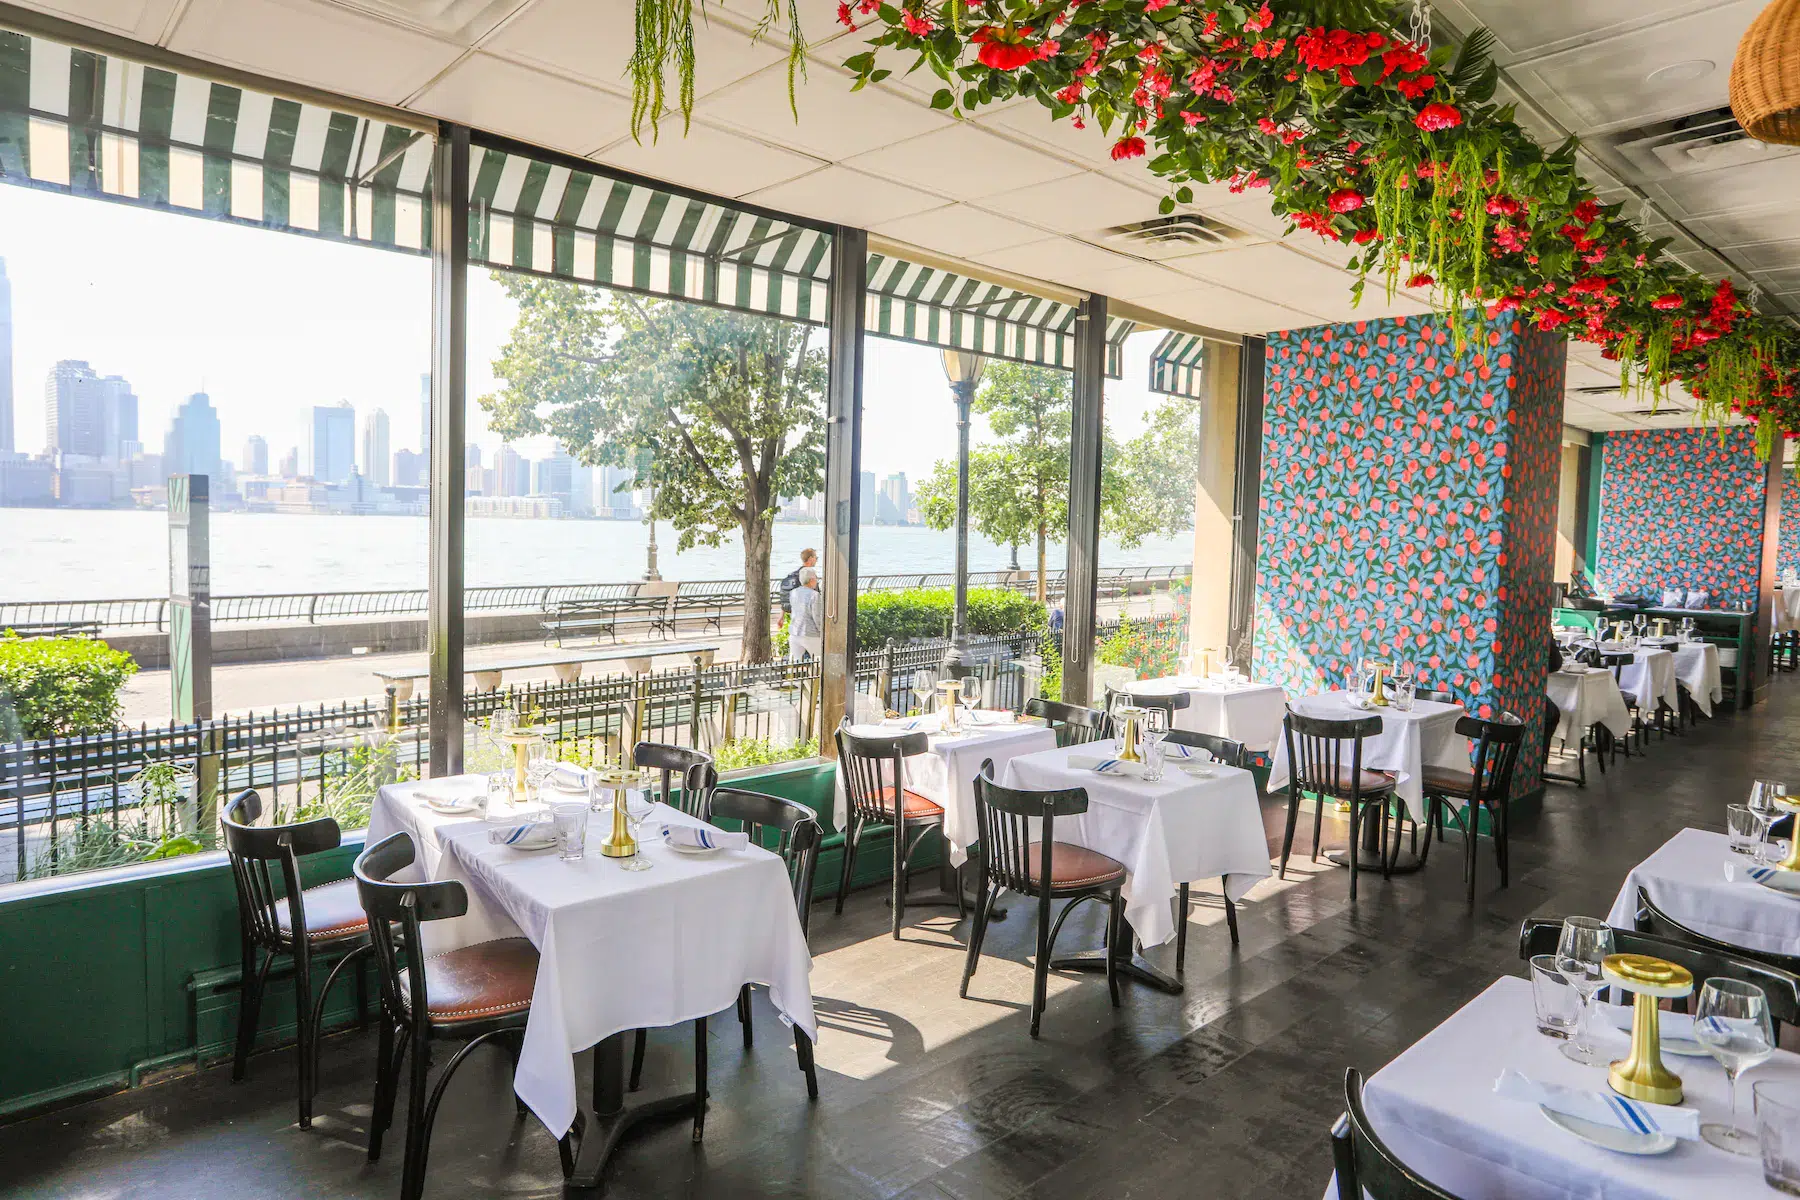 Mezze on the River
Best restaurants on the water NYC